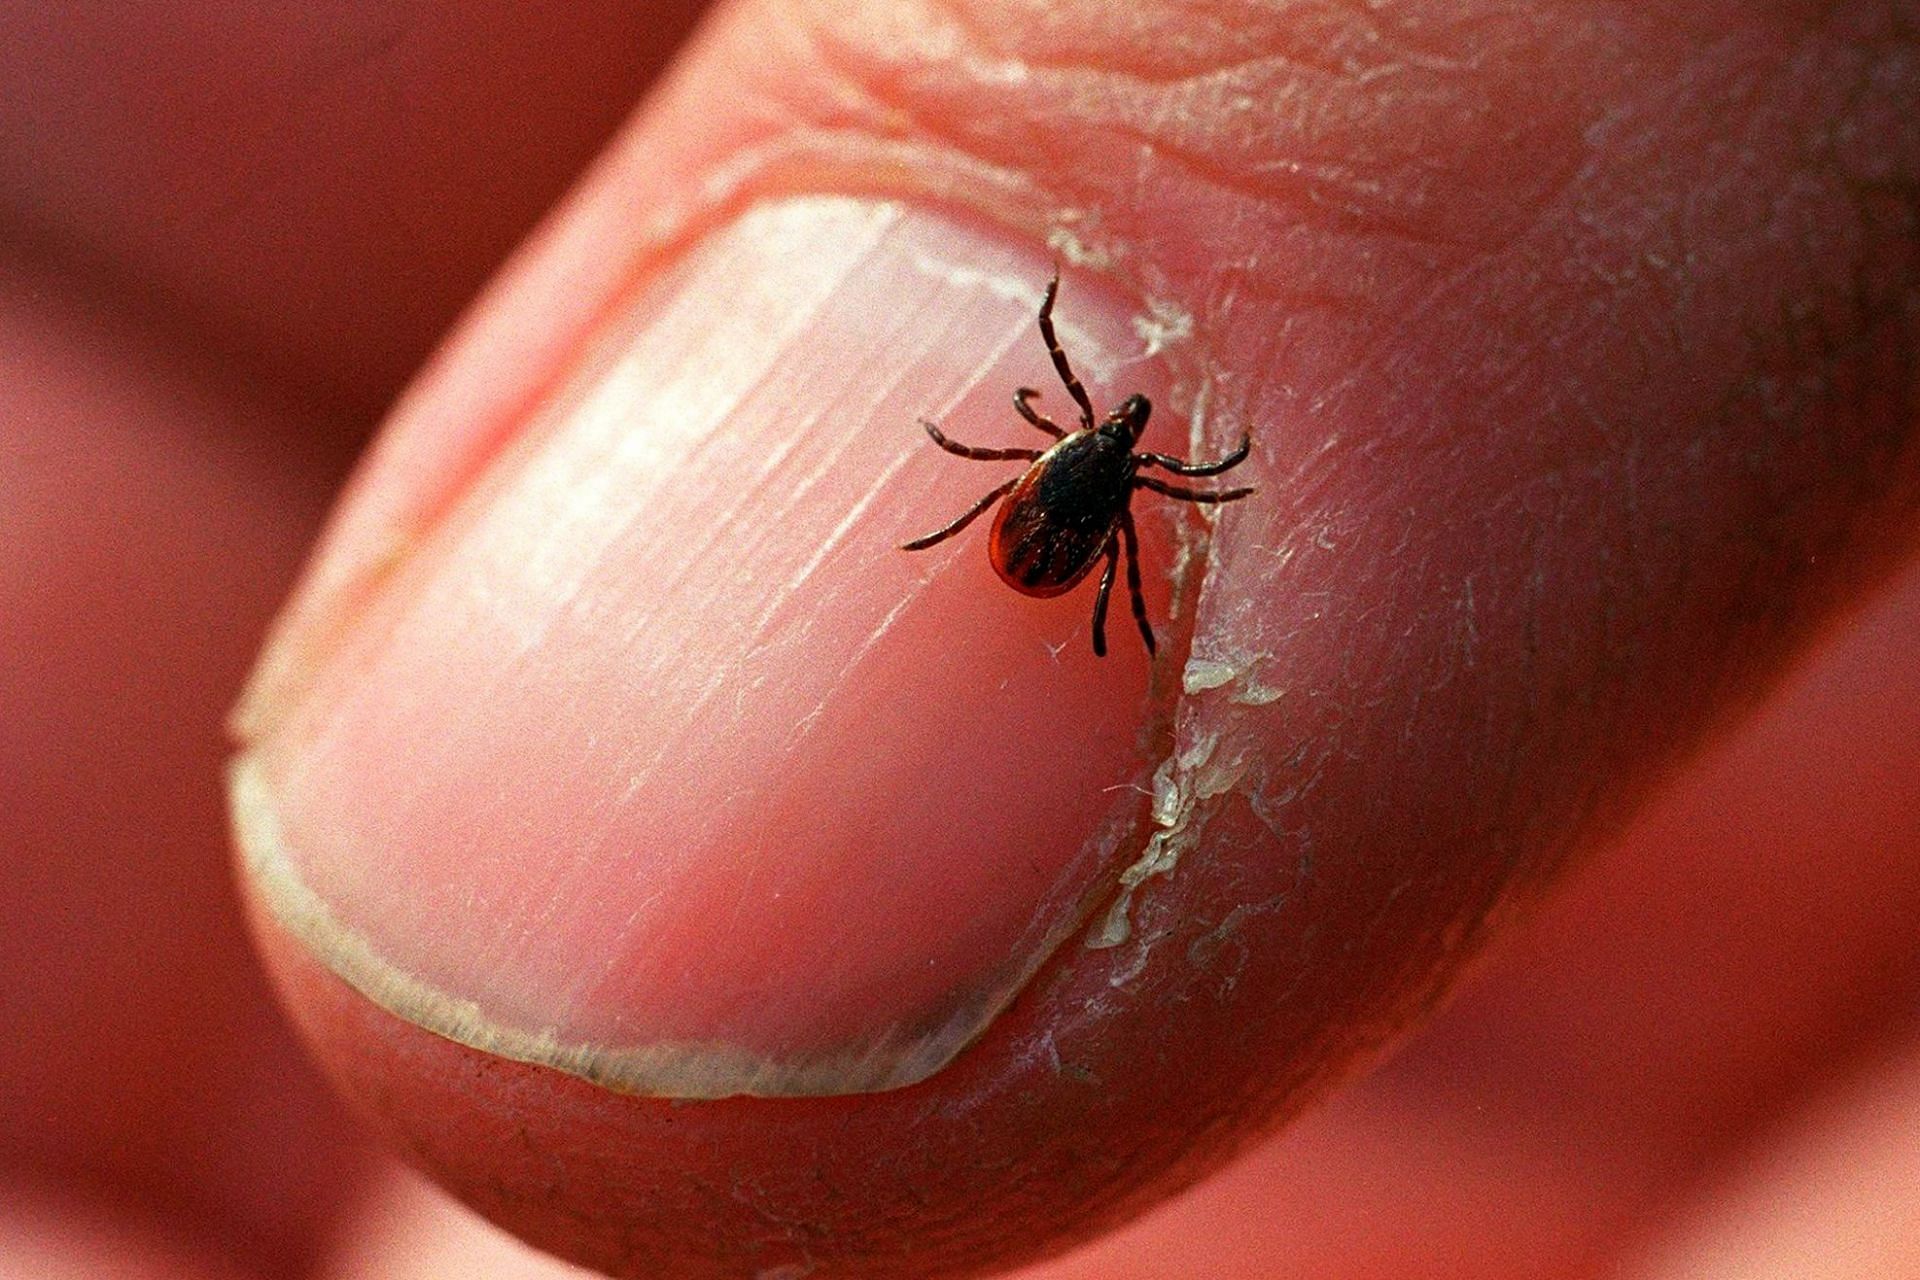 Ticks can cause a variety of virus infections (Image via Newsday LLC/Getty Images)